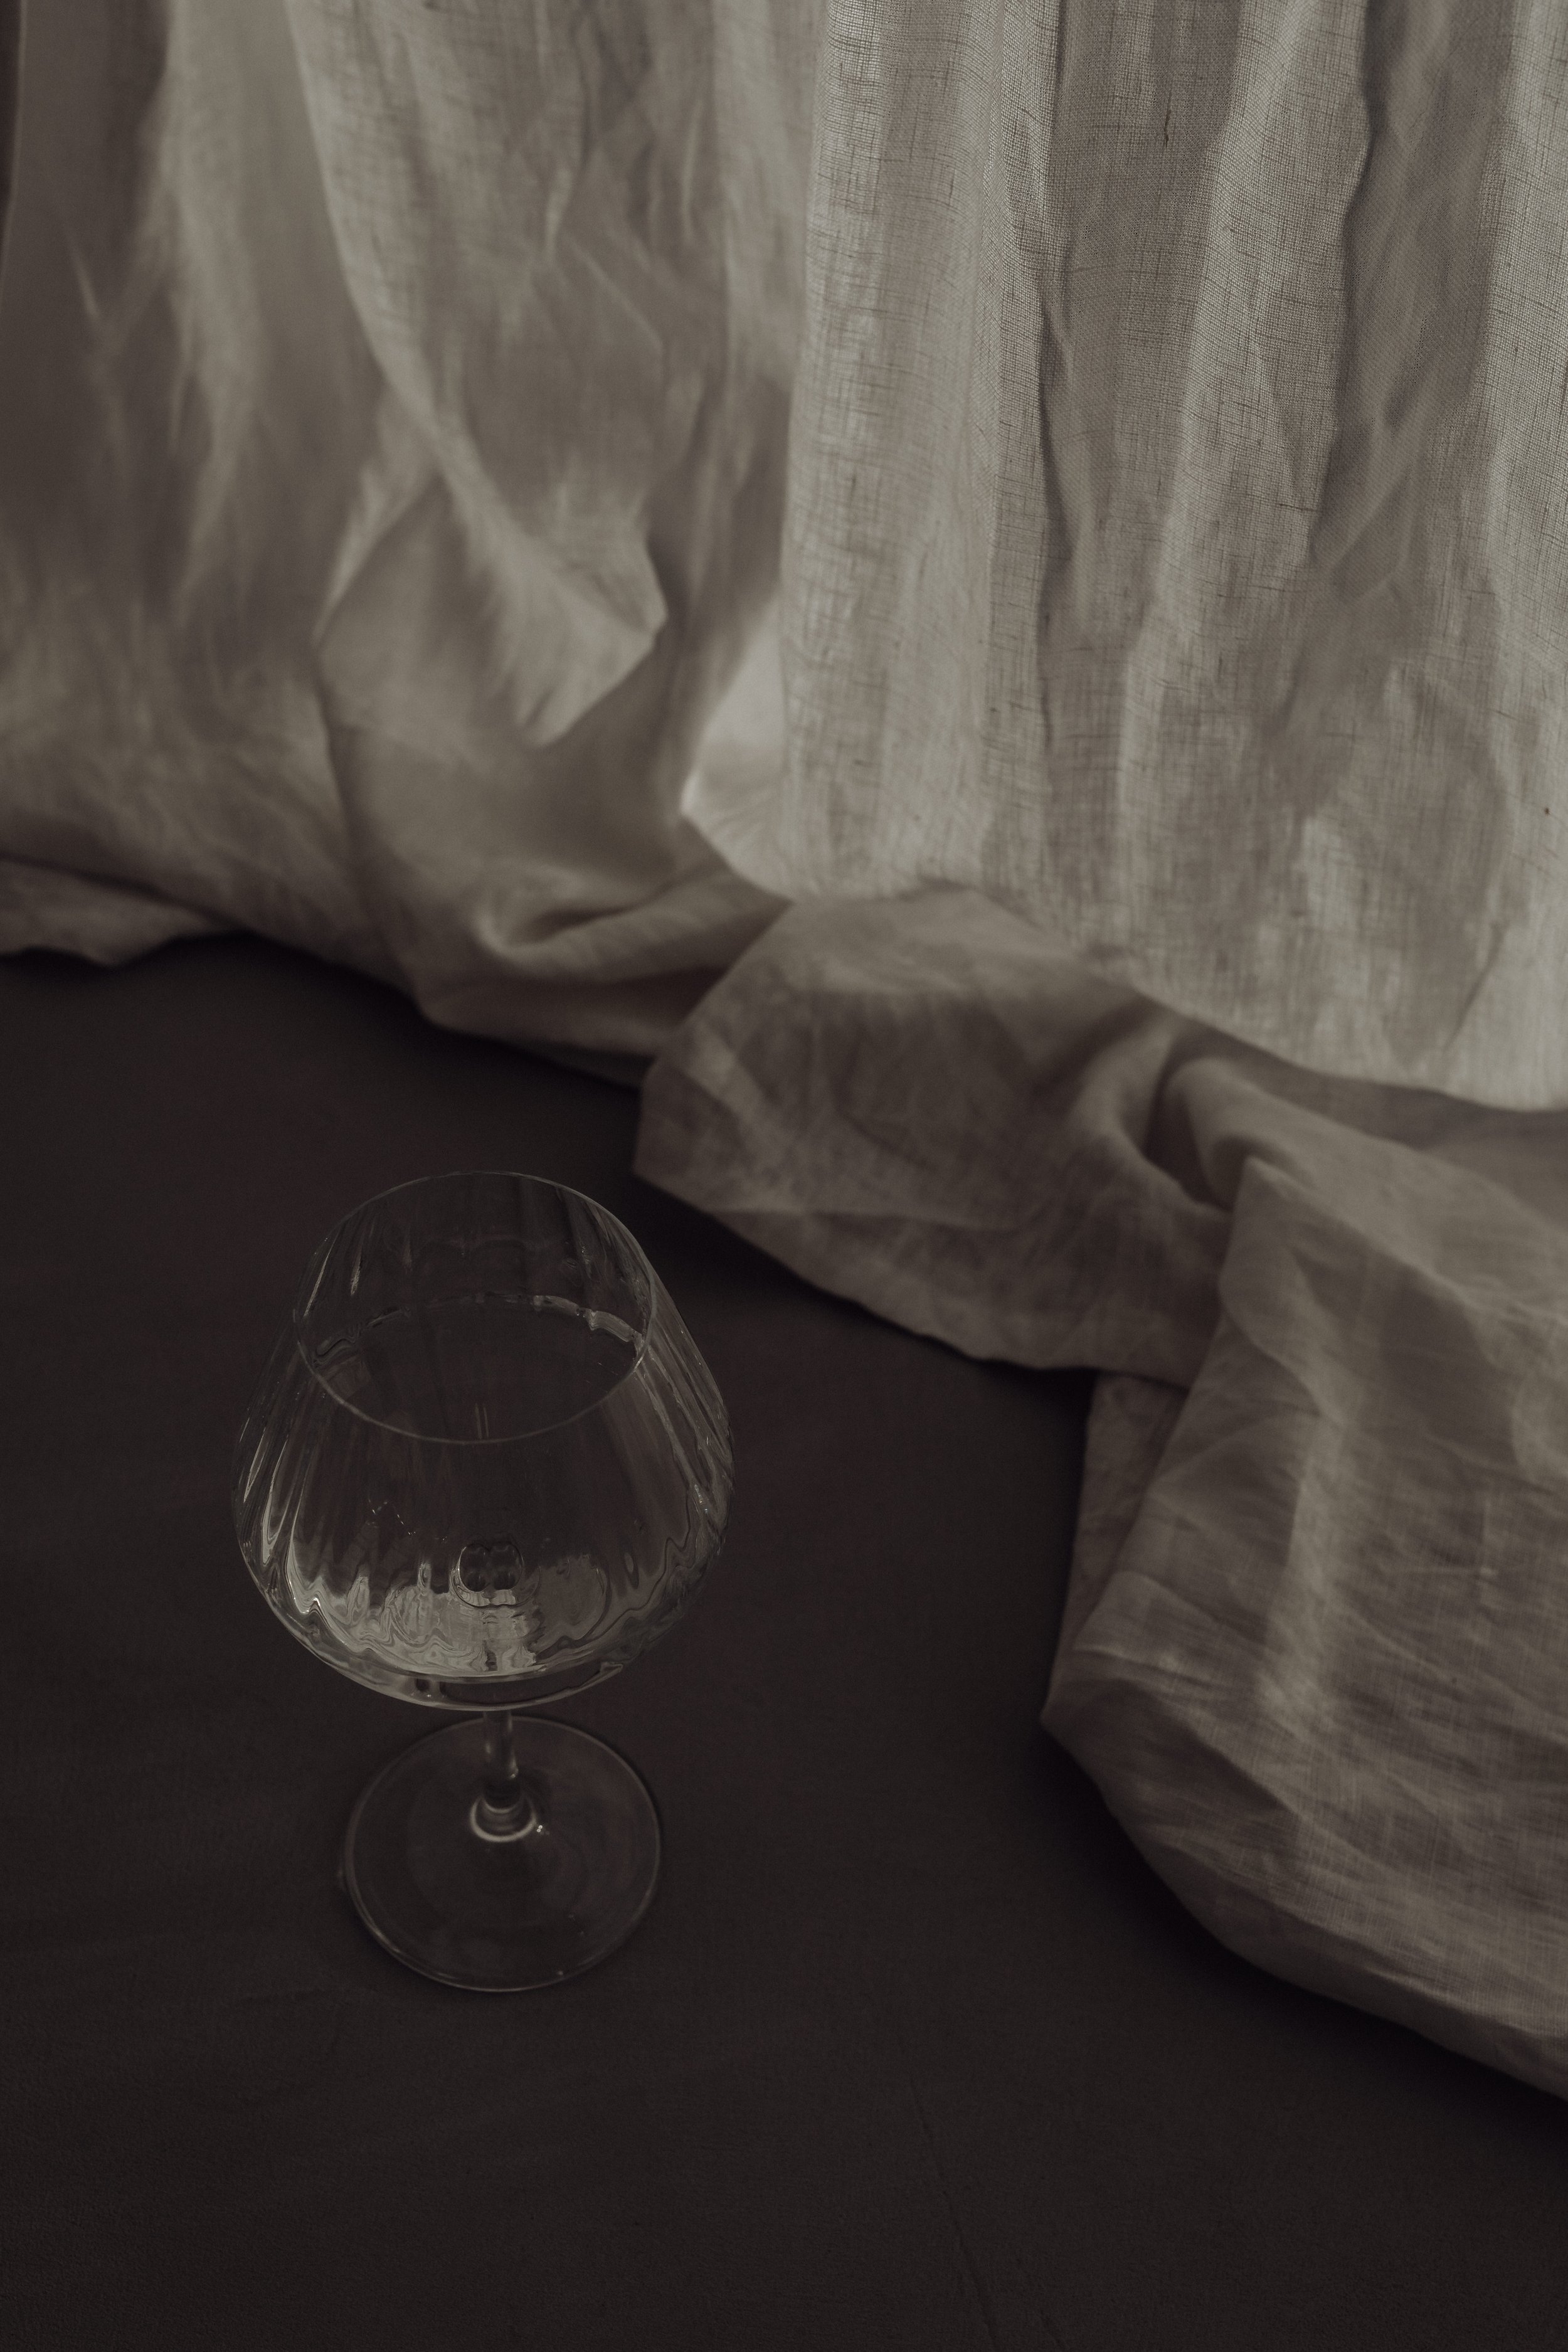 kaboompics_water-in-wine-glass-shadows-backgrounds-28813.jpg